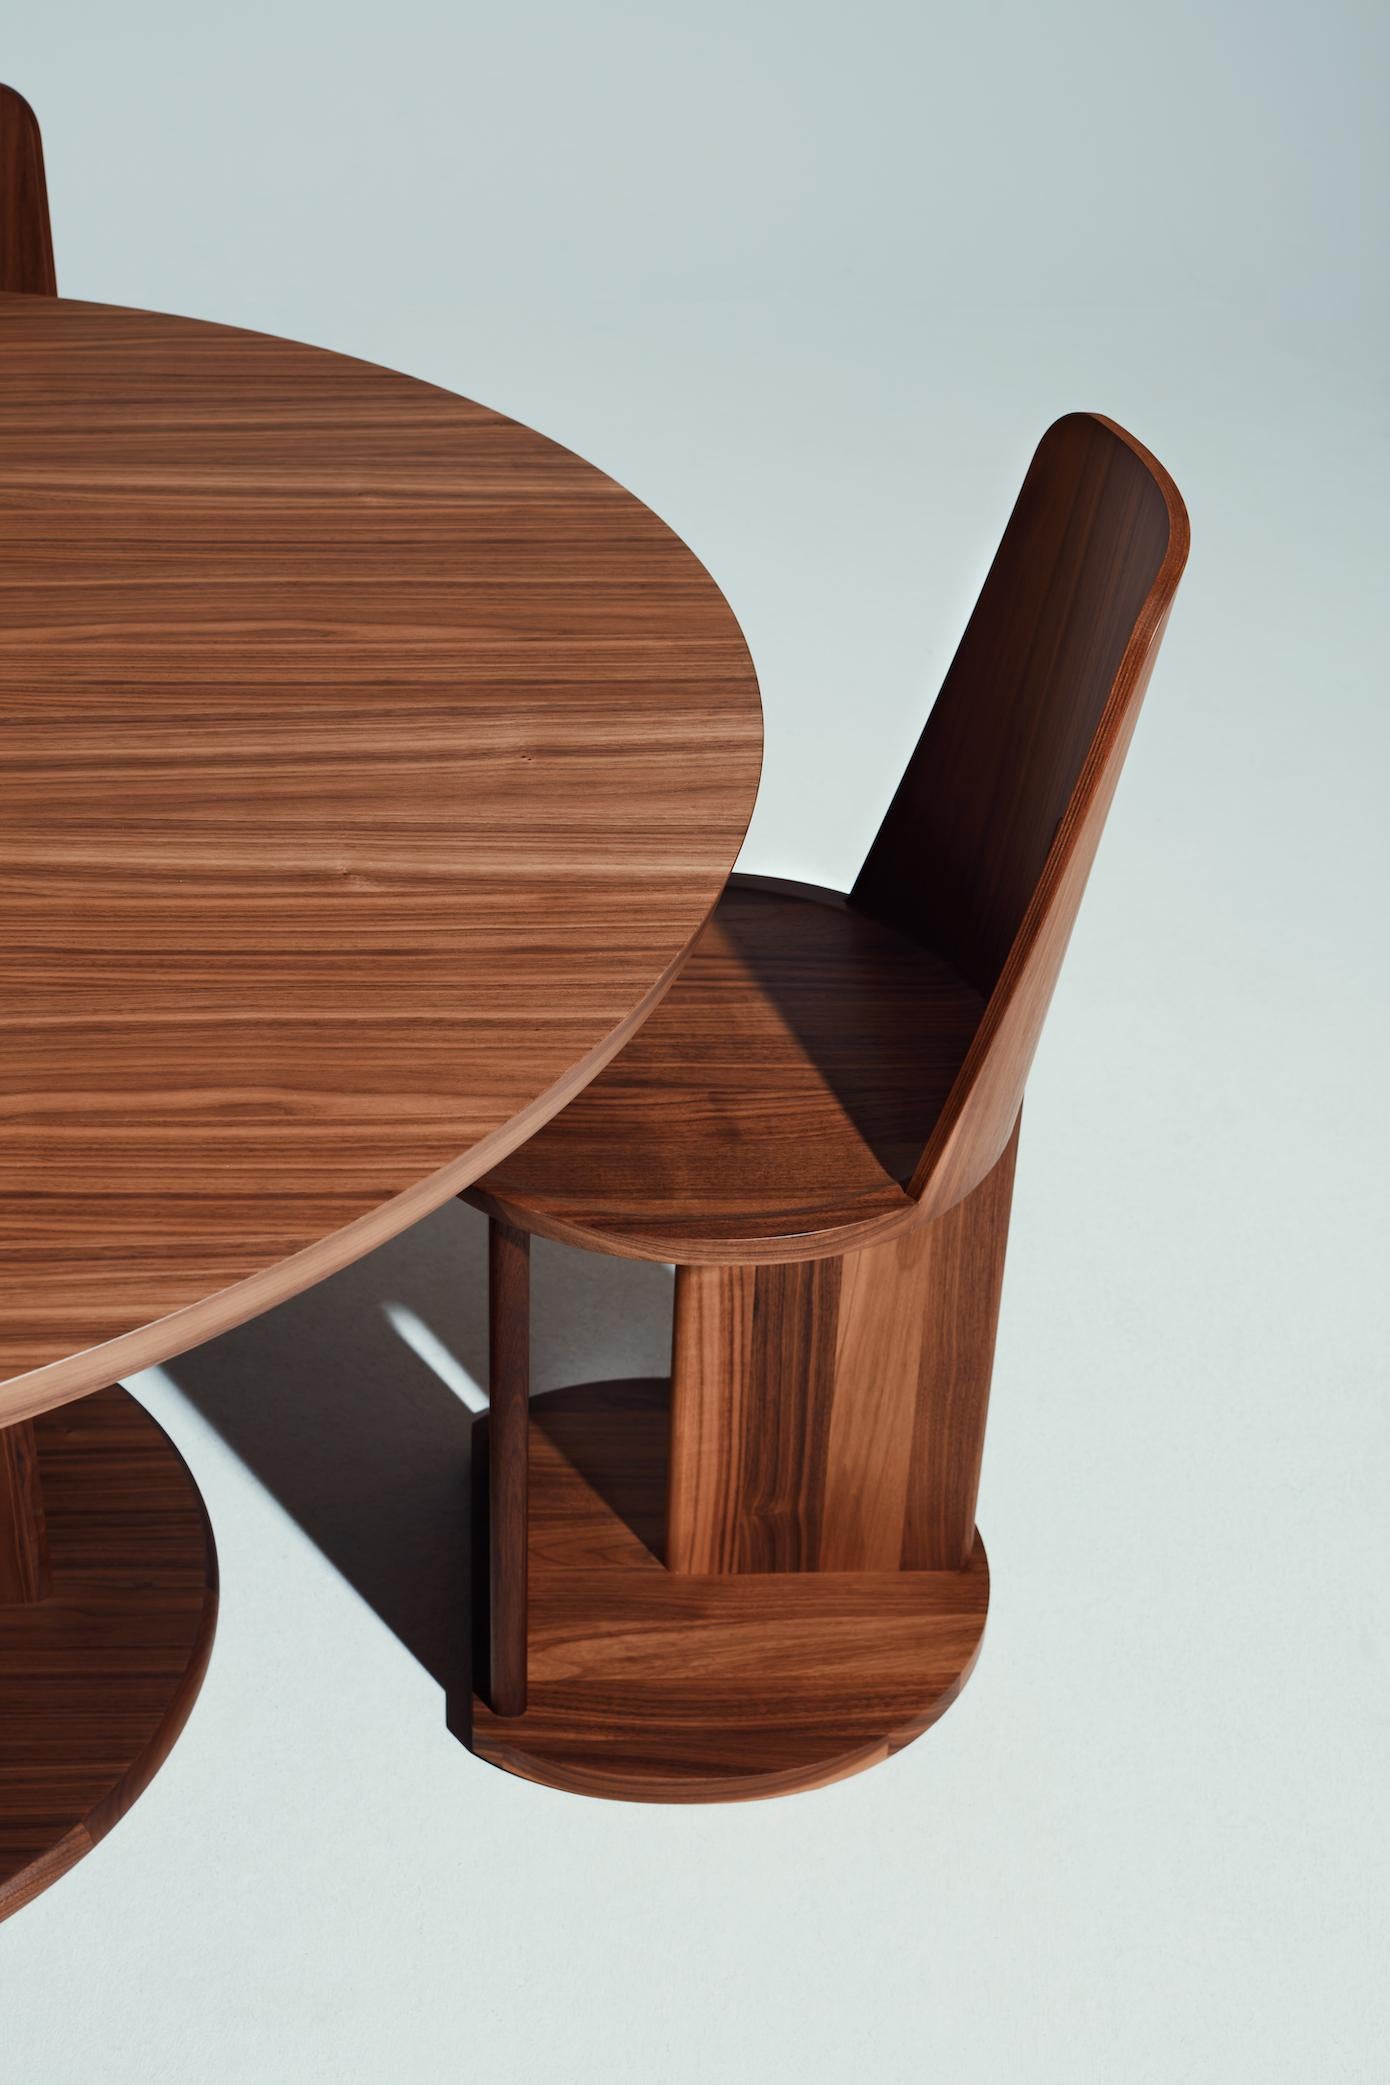 La Manufacture-Paris Intersection Canaletto Walnut Chair Designed by Neri & Hu For Sale 2